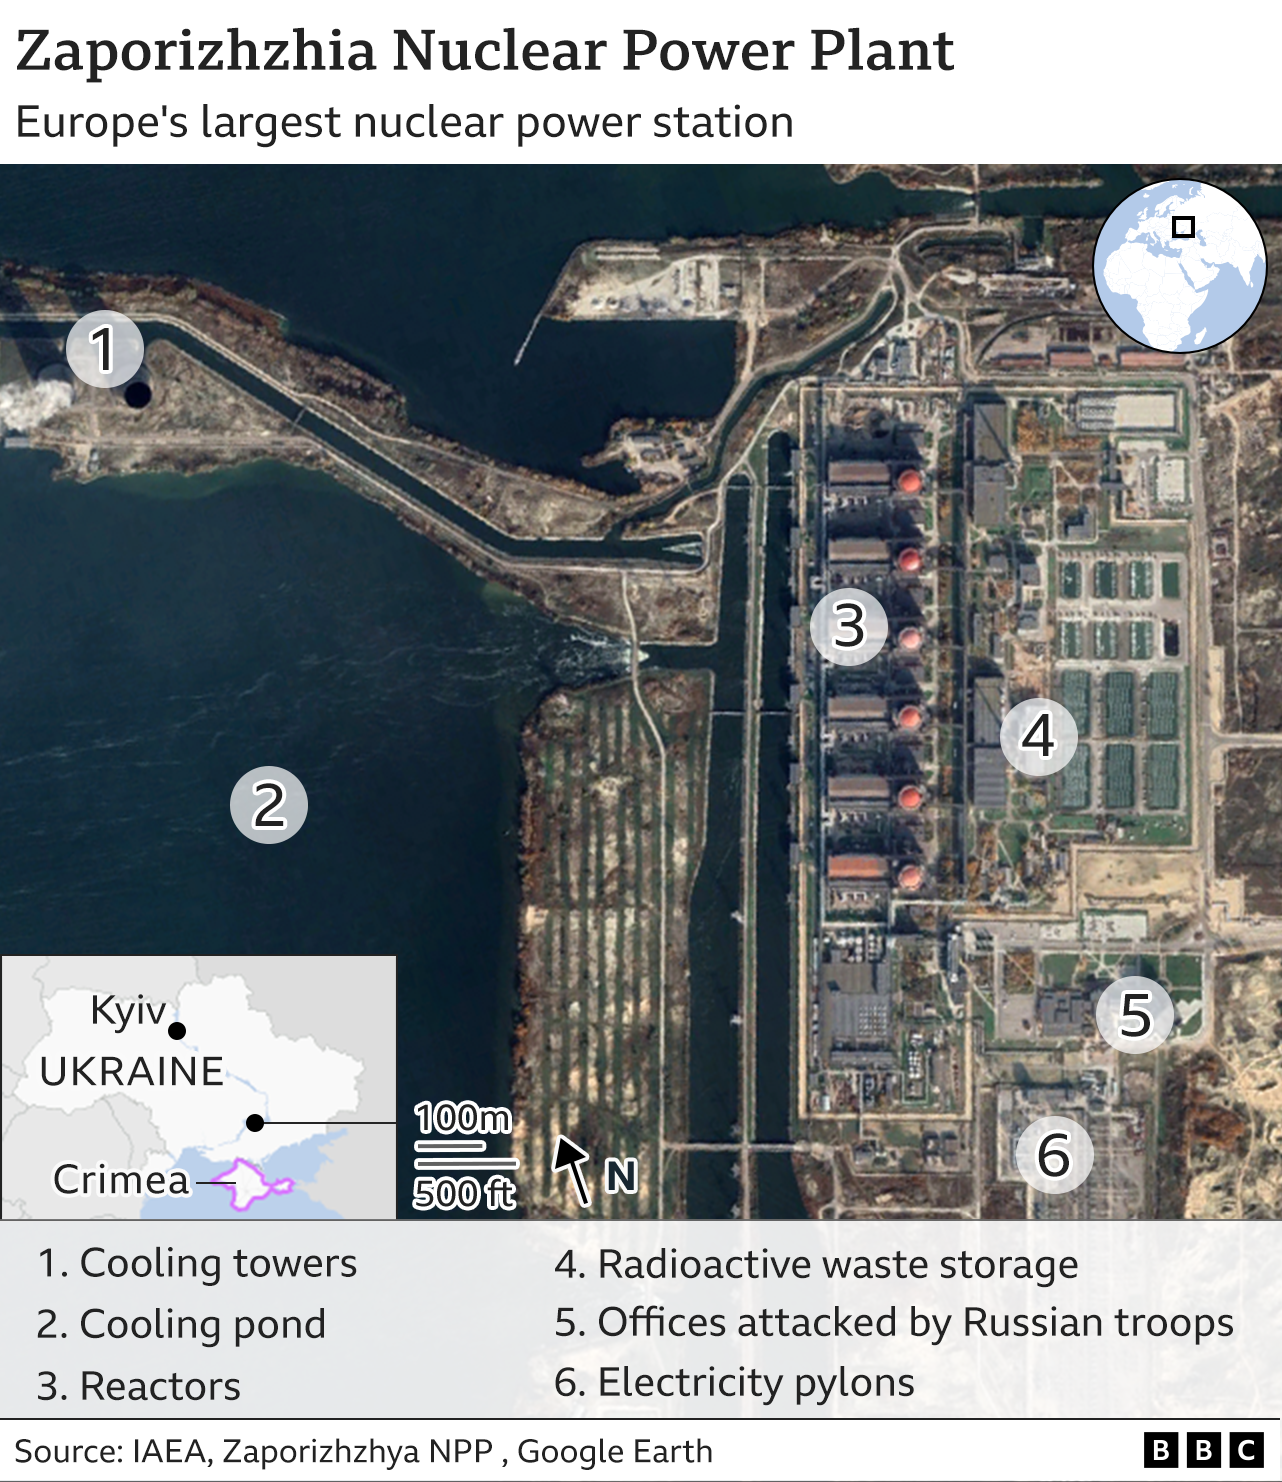 Map showing the location of key components of Ukraine's largest nuclear power plant